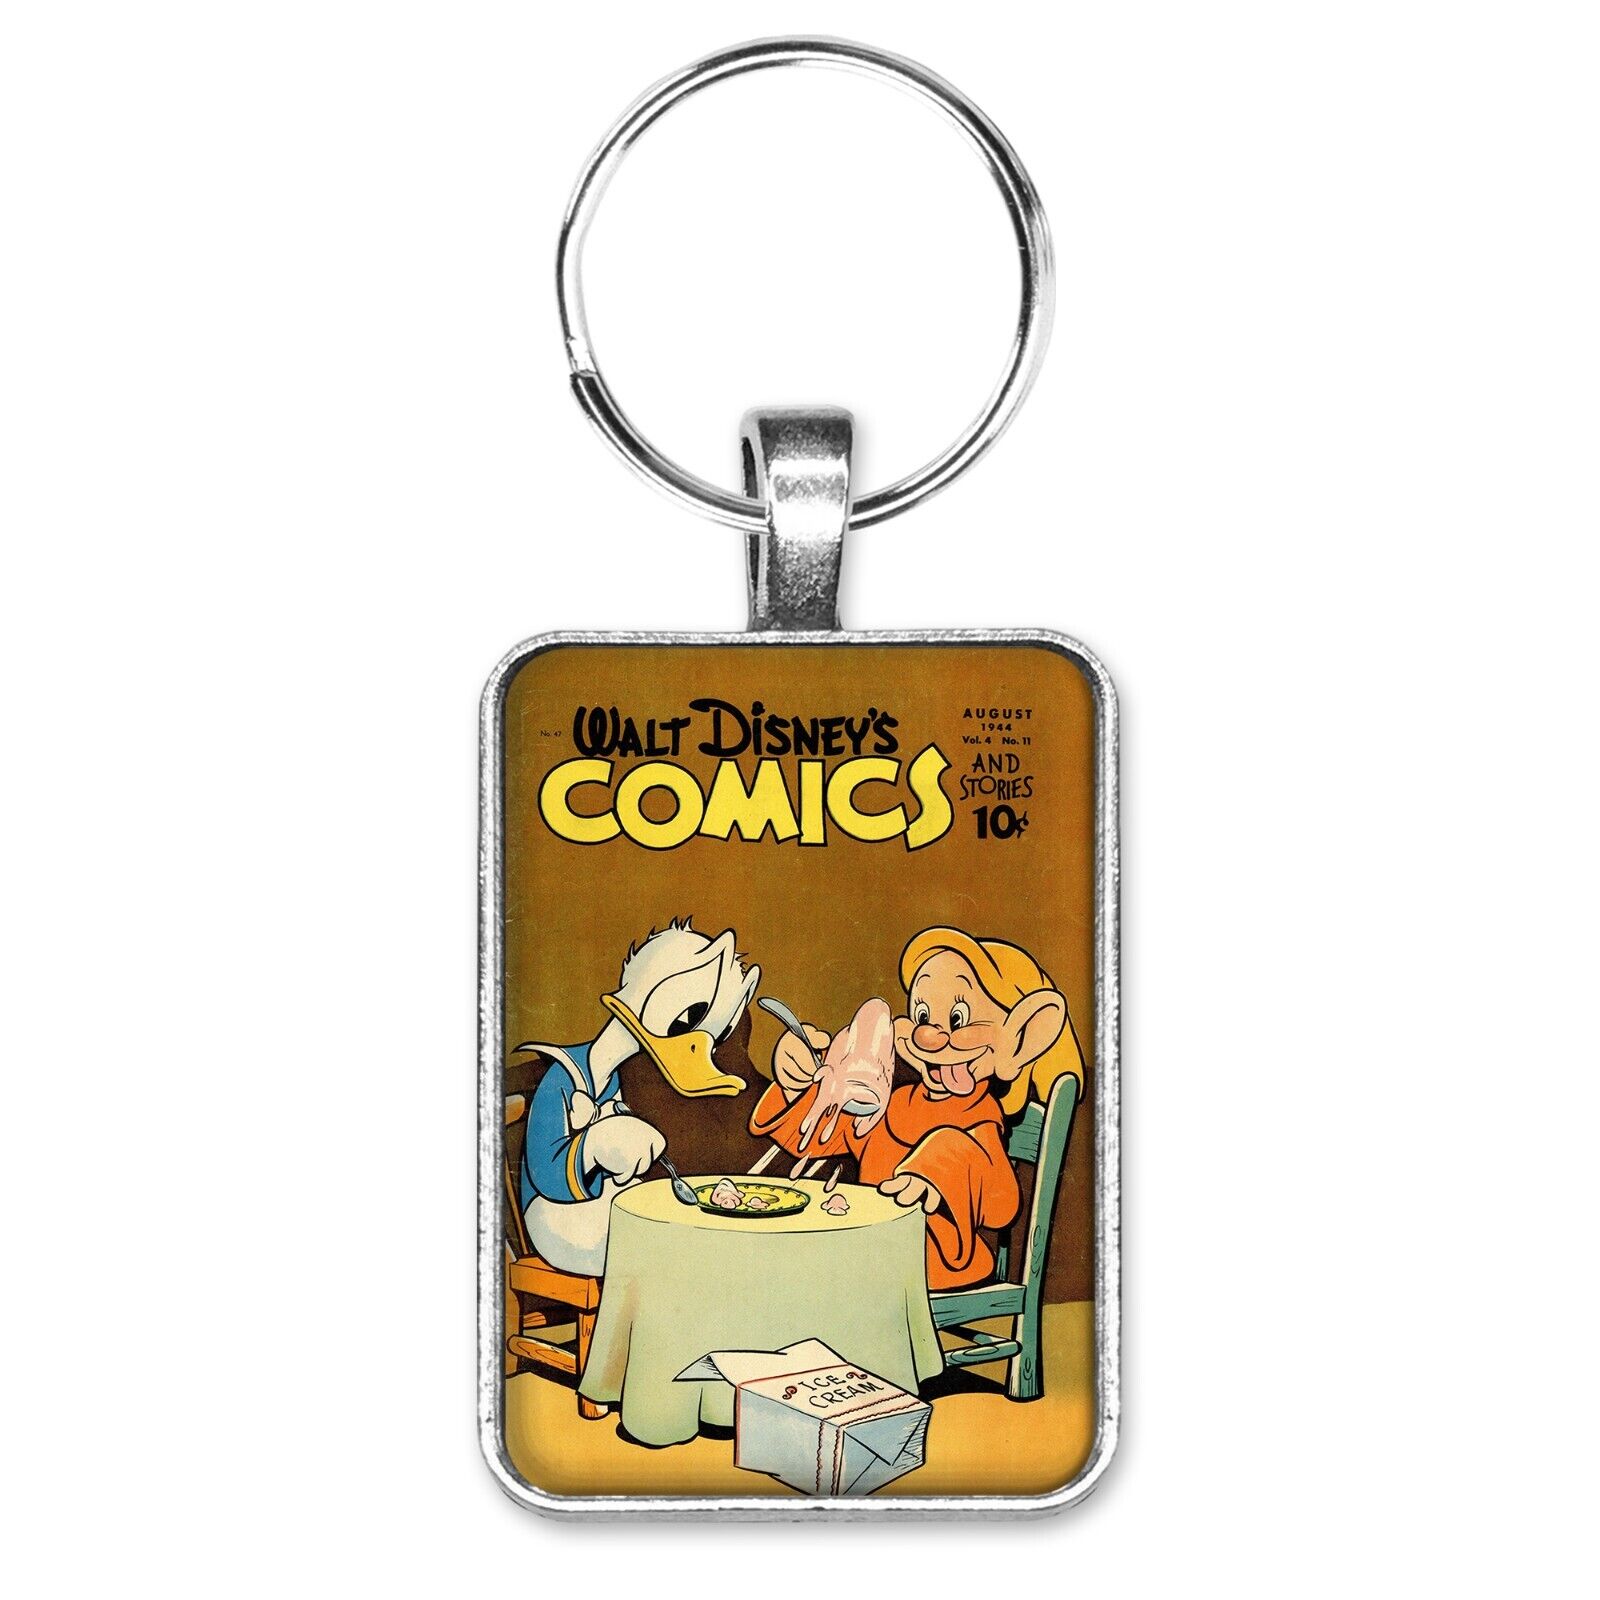 Walt Disney's Comics & Stories #47 Donald Duck & Dopey Cover Key Ring / Necklace